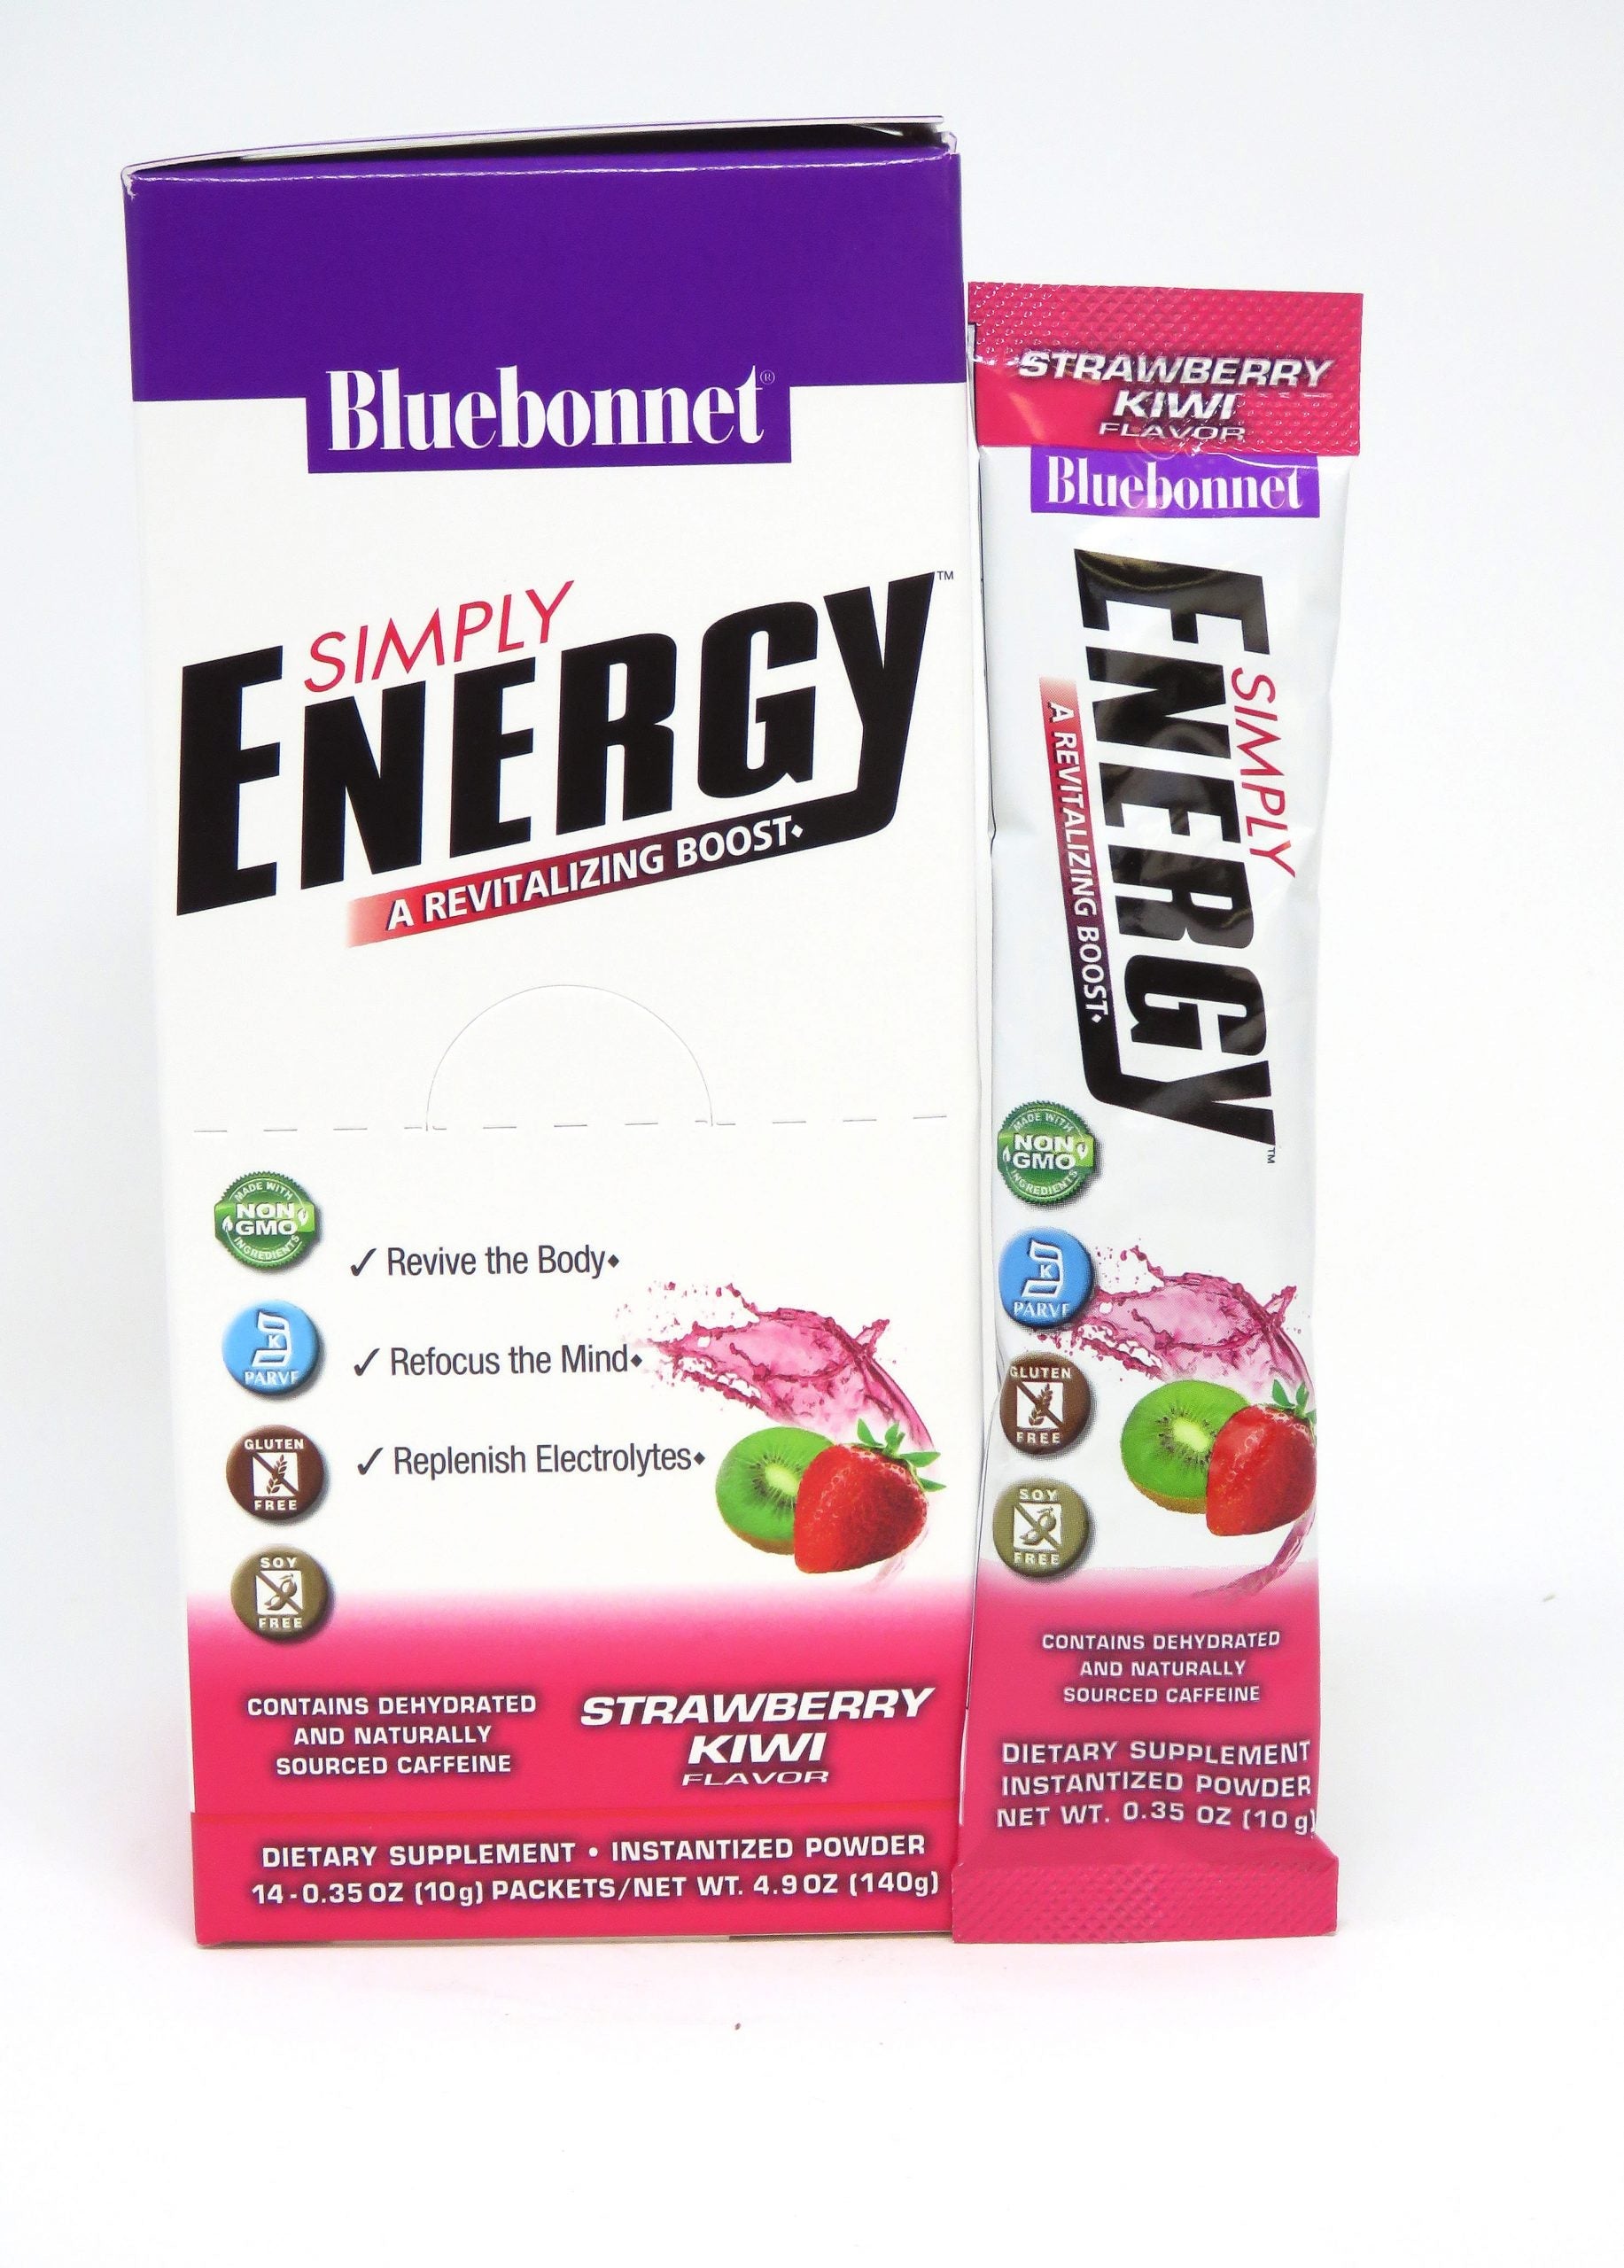 Simply Energy Powder is derived from a blend of herbal extracts, amino acids and electrolytes to help the body generate a wholesome surge of energy. The amino acids, L-arginine, L-citrulline and beta-alanine, have been incorporated to enhance blood flow, as well as theanine to help the mind reach optimal mental clarity. Stick pack and box. #size_14 pk